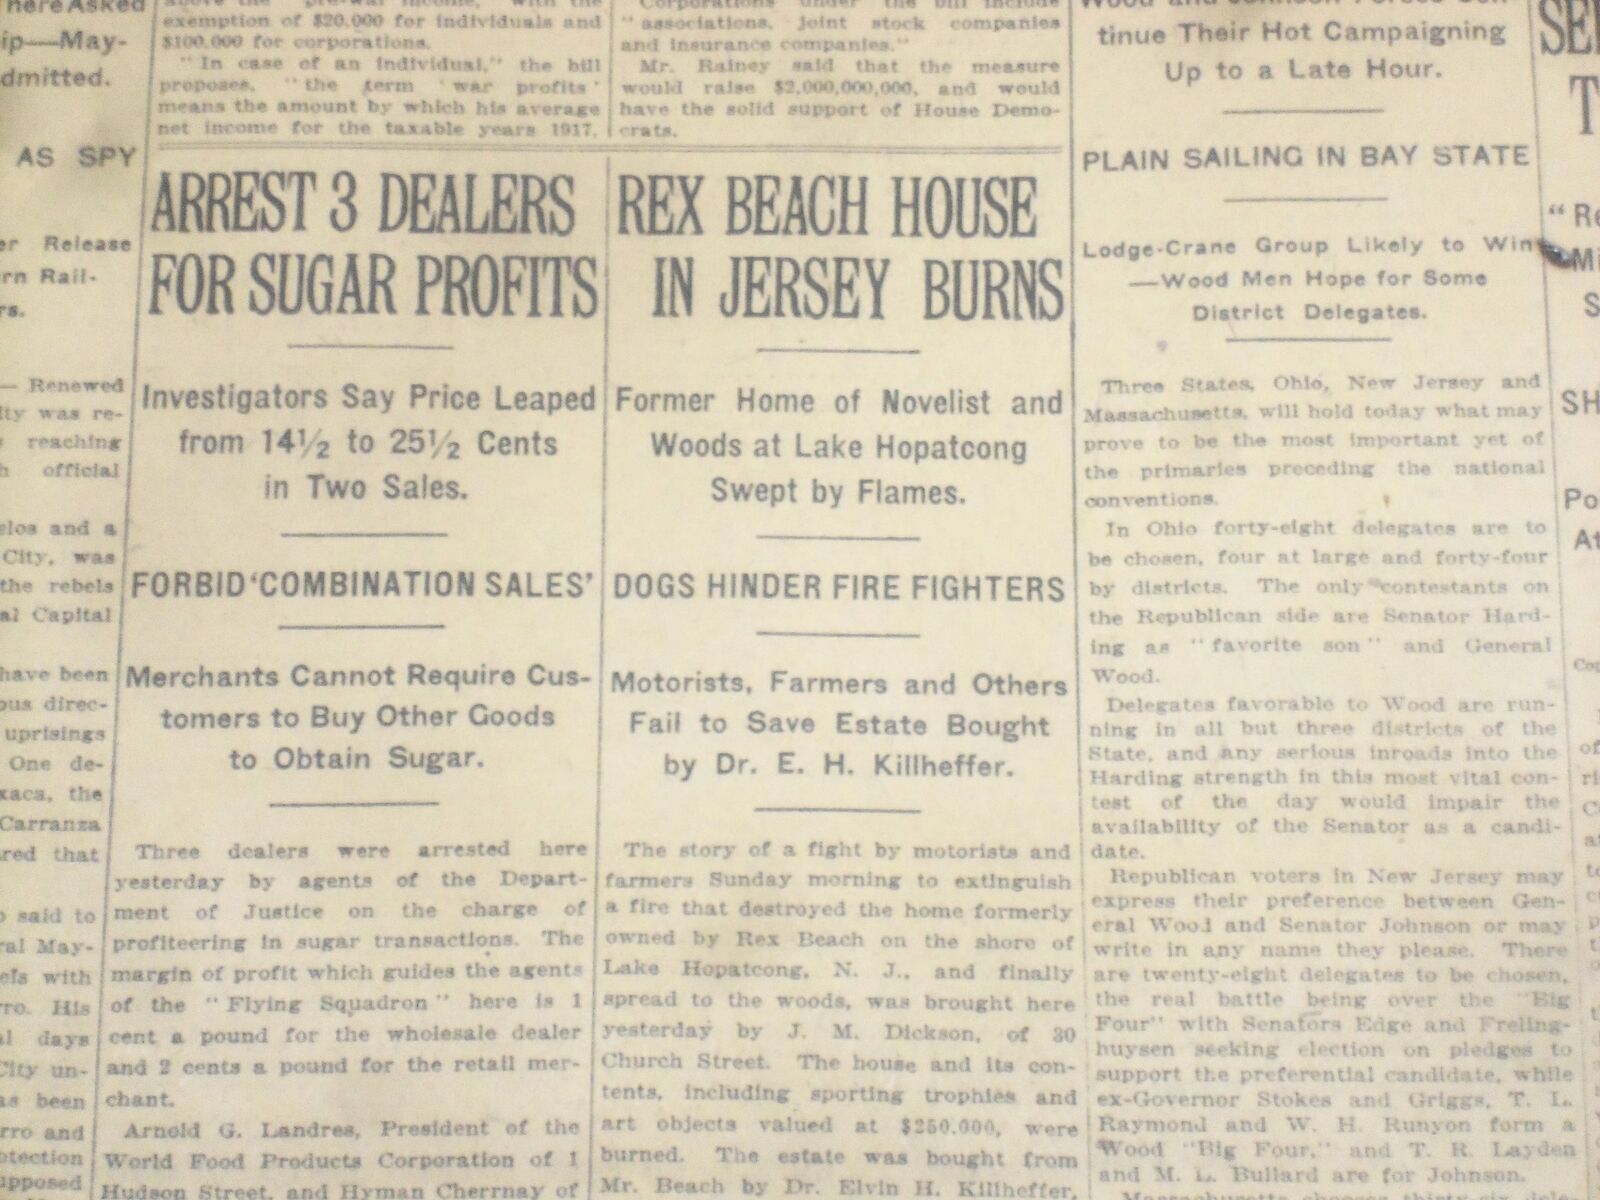 1920 APRIL 27 NEW YORK TIMES - REX BEACH HOUSE BURNS IN NEW JERSEY - NT 8292